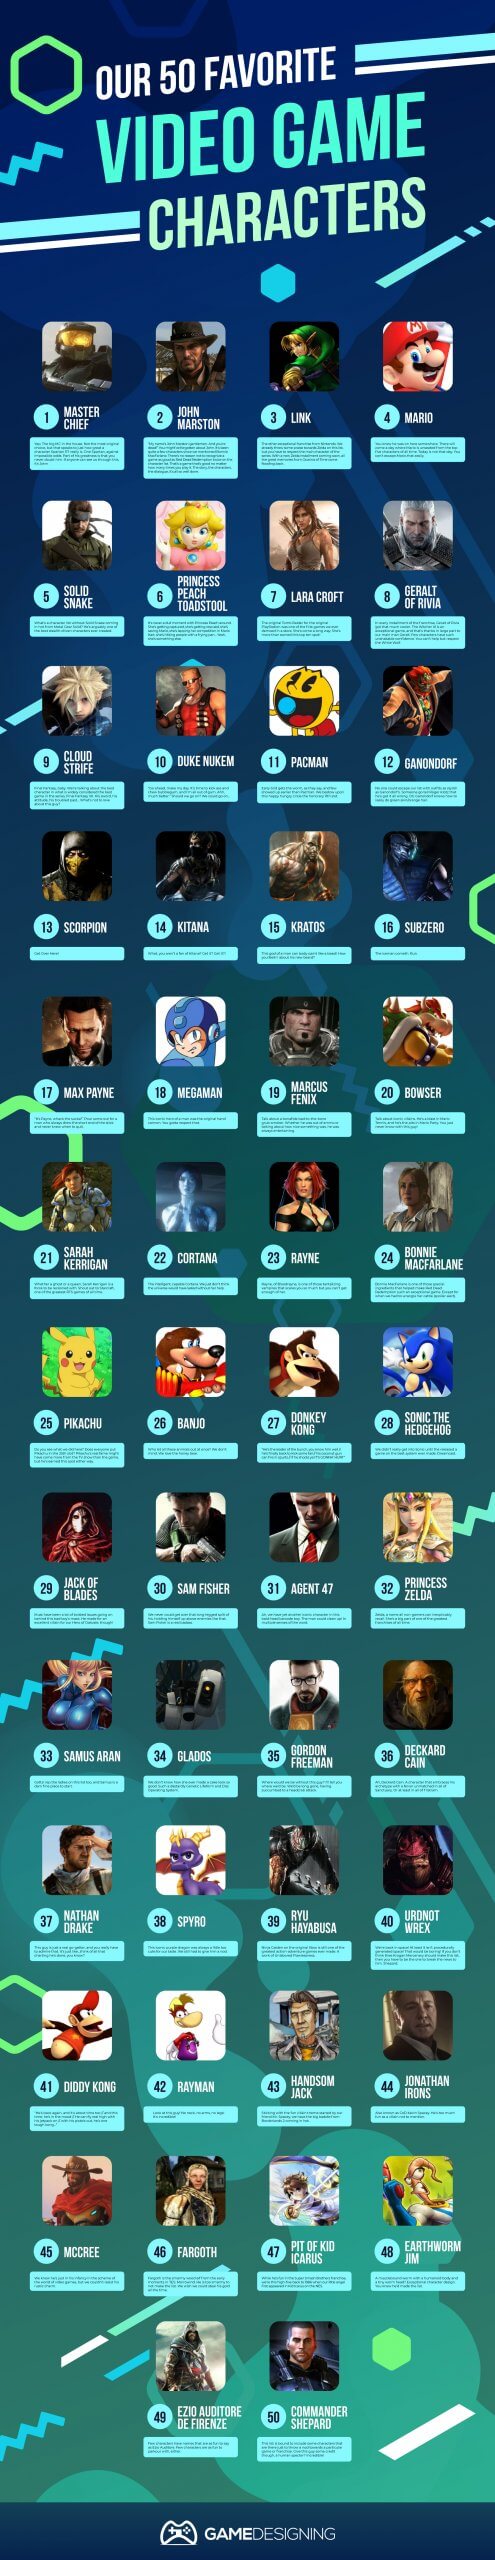 famous video games of all time